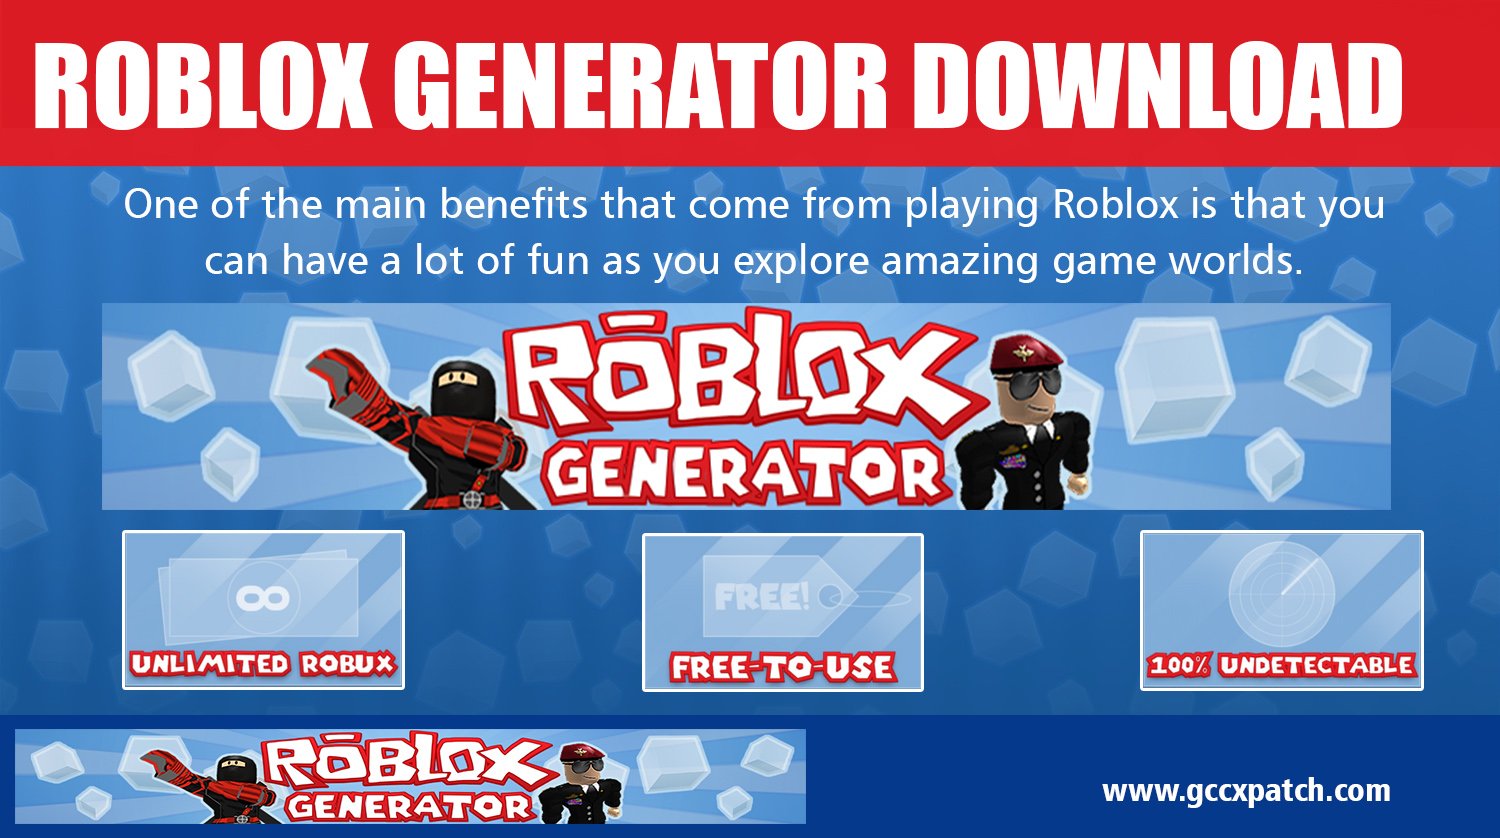 Robux Generator On Twitter You Can Get Roblox Generator - el mejor hack para roblox indetectable how to get robux by